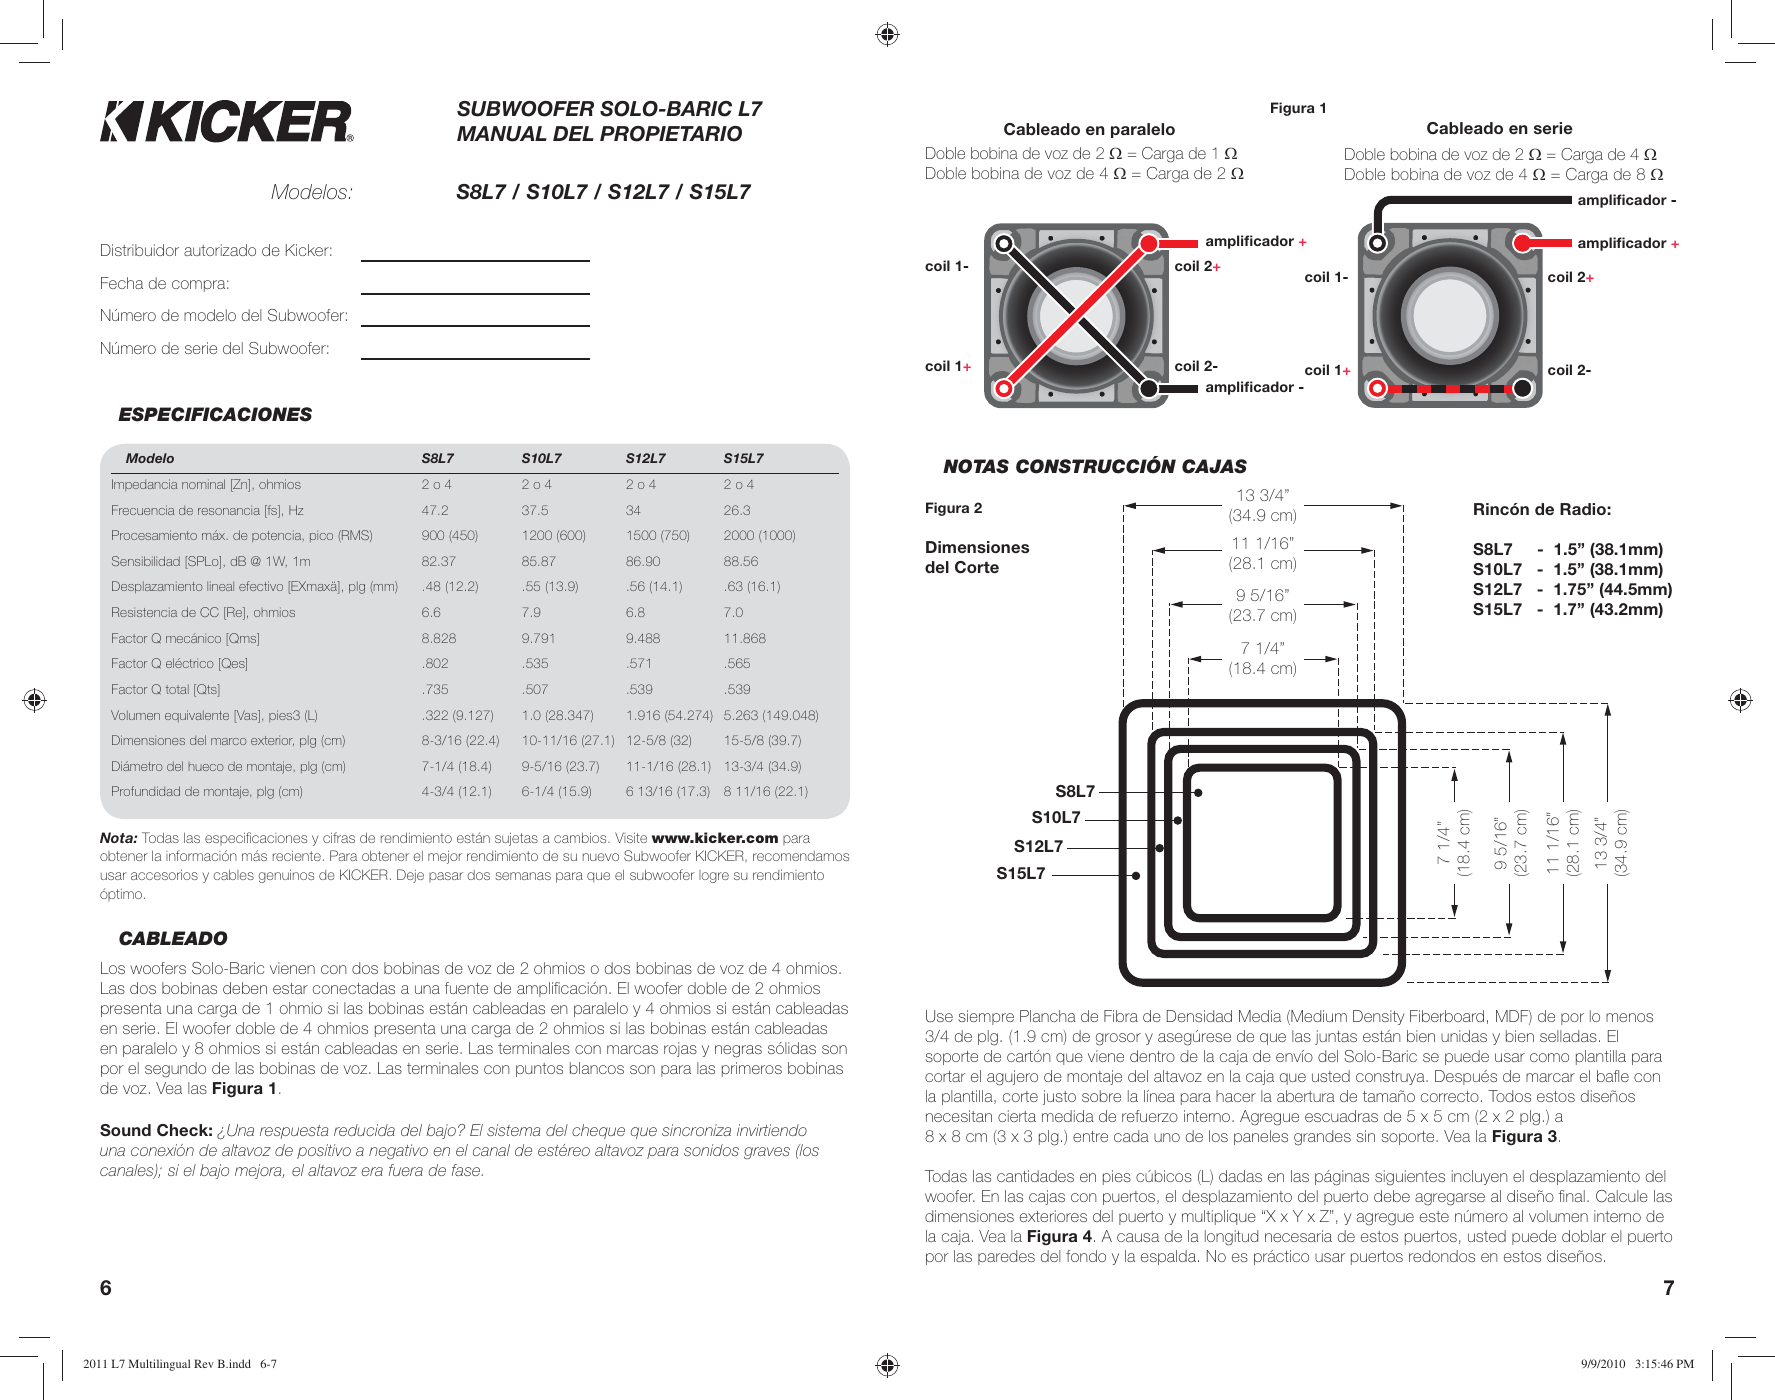 Page 4 of 11 - Kicker Kicker-2011-Solo-Baric-L7-Owners-Manual- 2011 L7 Multilingual Rev B  Kicker-2011-solo-baric-l7-owners-manual